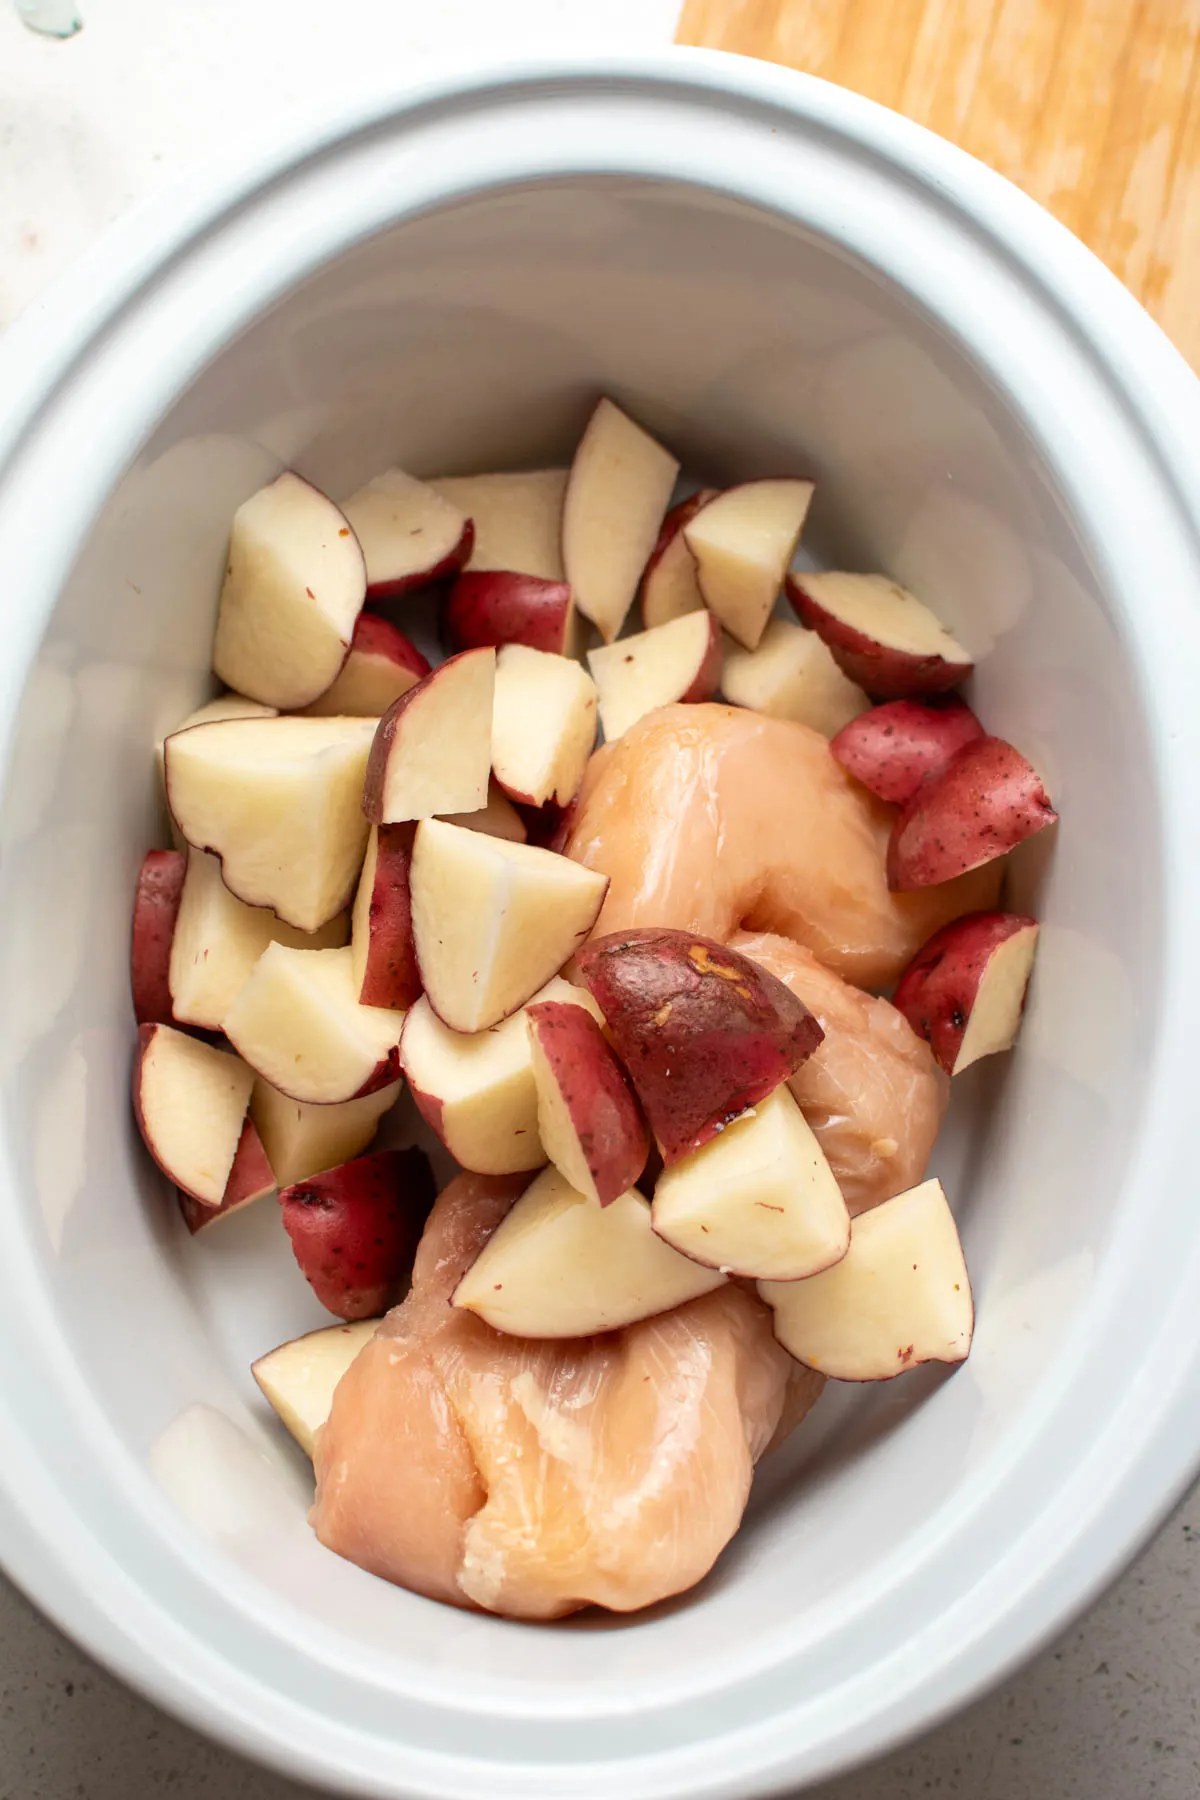 Chopped red potatoes and chicken in white Crockpot insert.